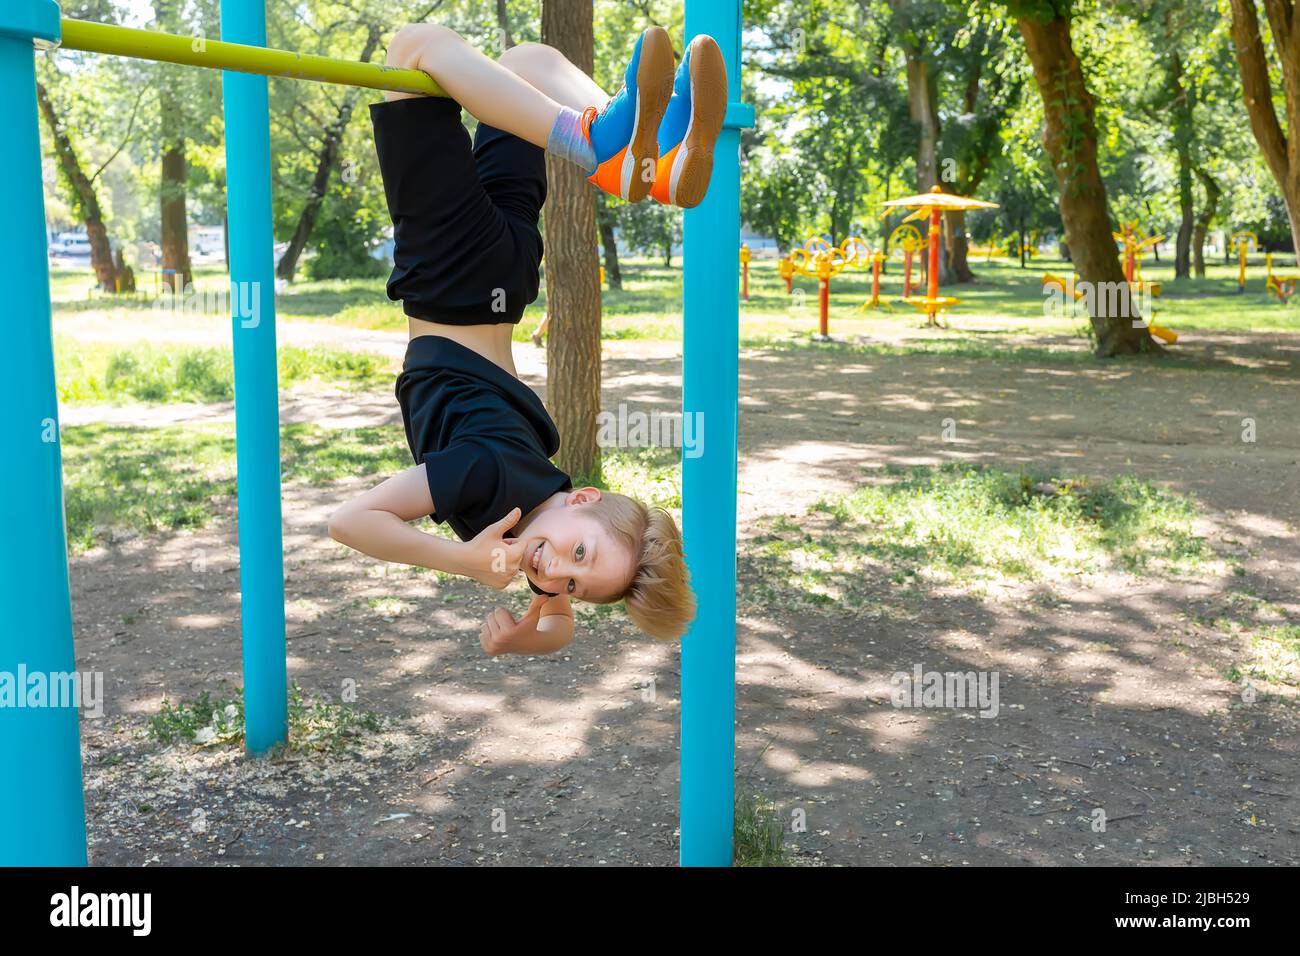 athlete boy hanging upside down and laughing showing thumb up Stock Photo